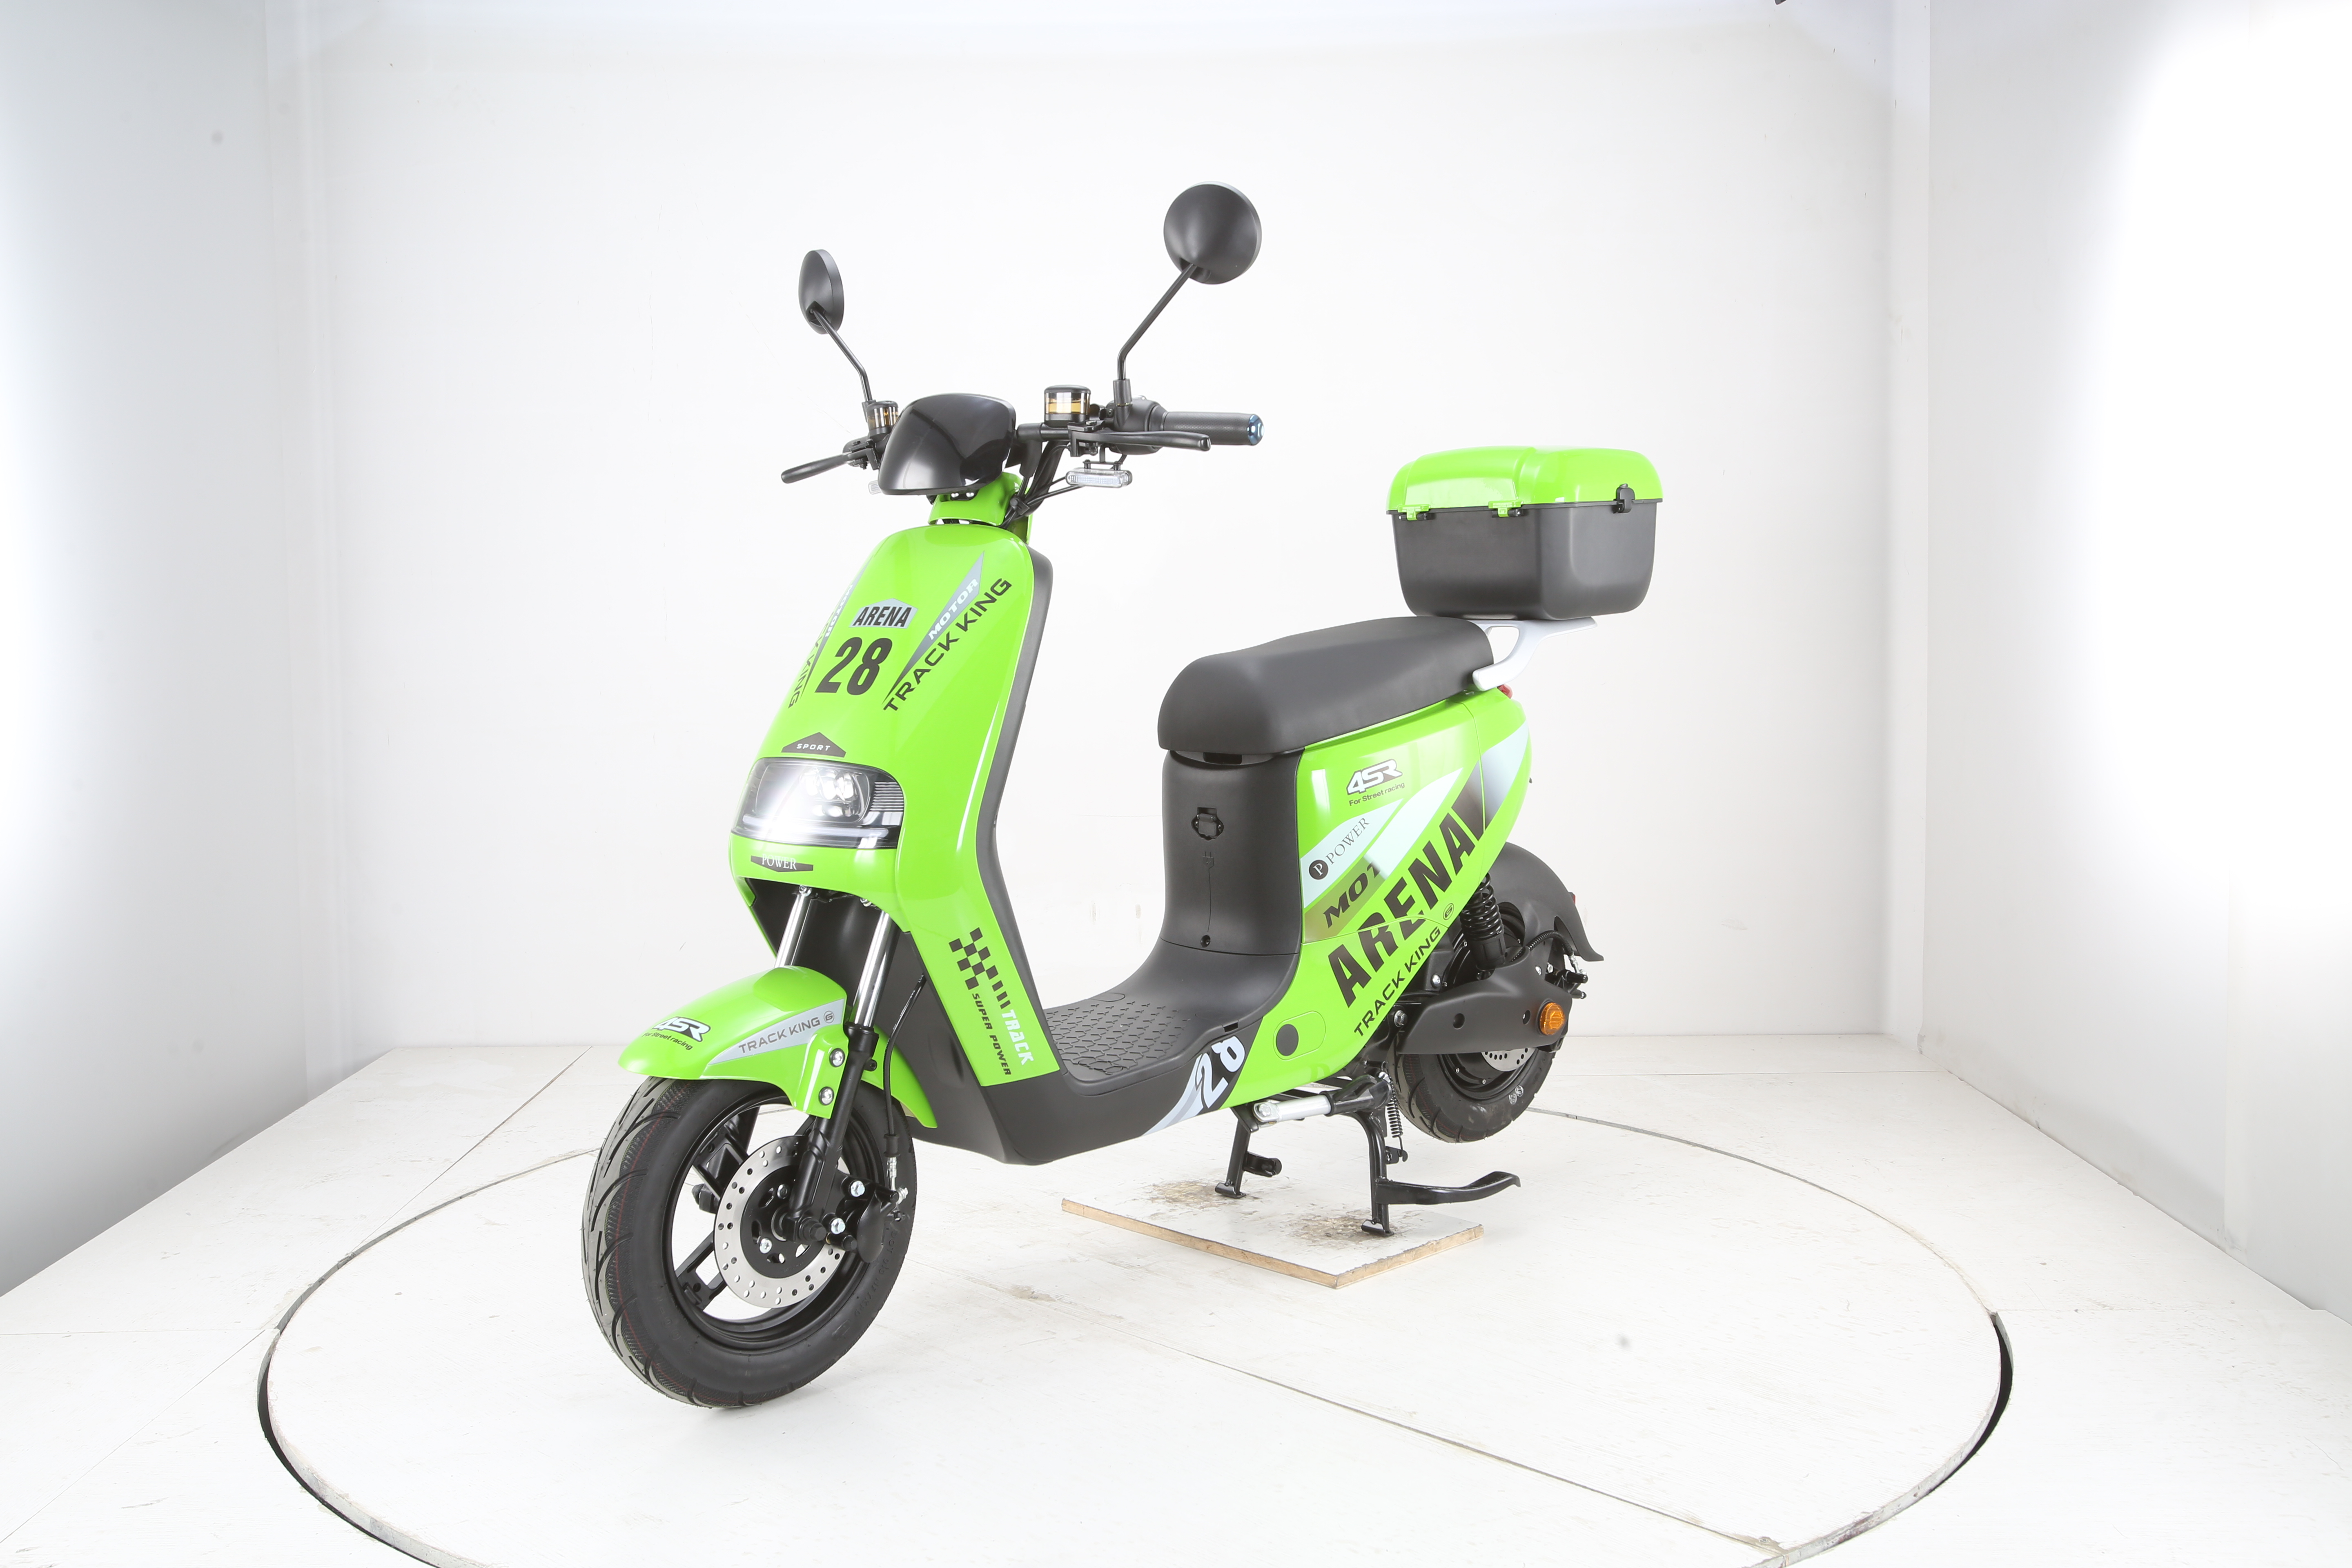 Good-speed electric motorcycle front and rear disc brake adult electric scooter.